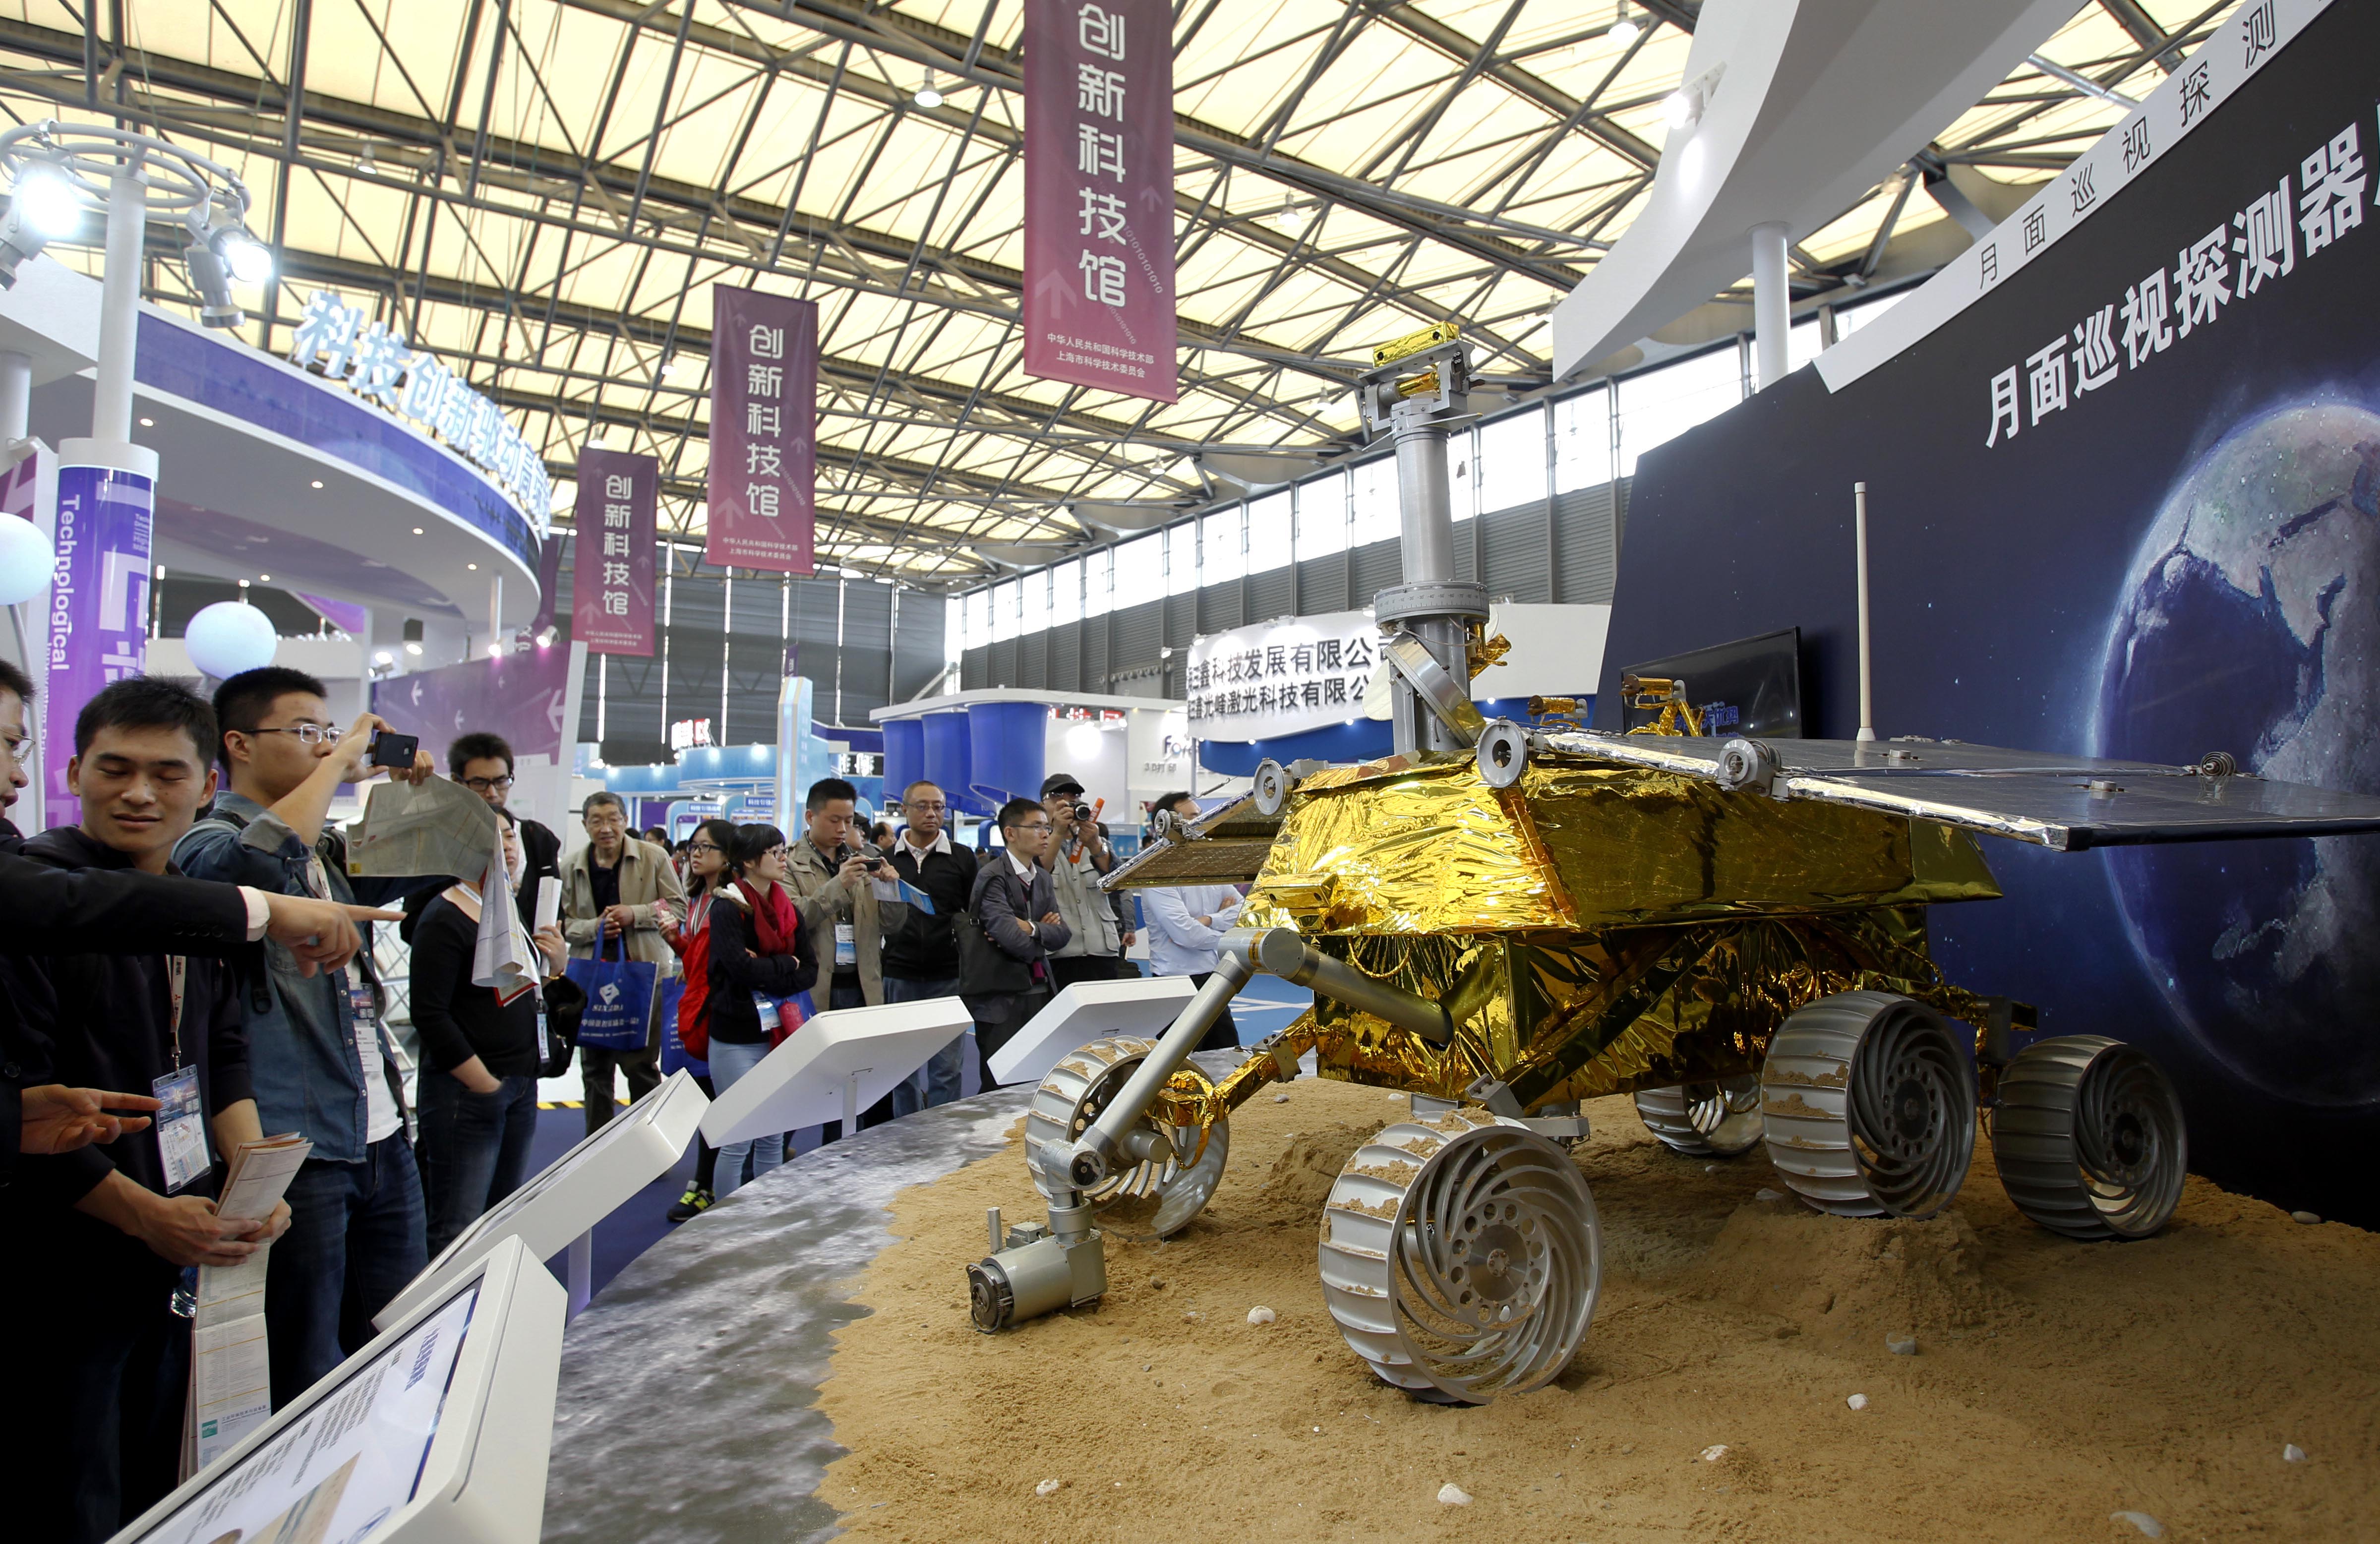 Visitors view the model of a lunar probe during the 15th China International Industry Fair in Shanghai. Photo: Xinhua